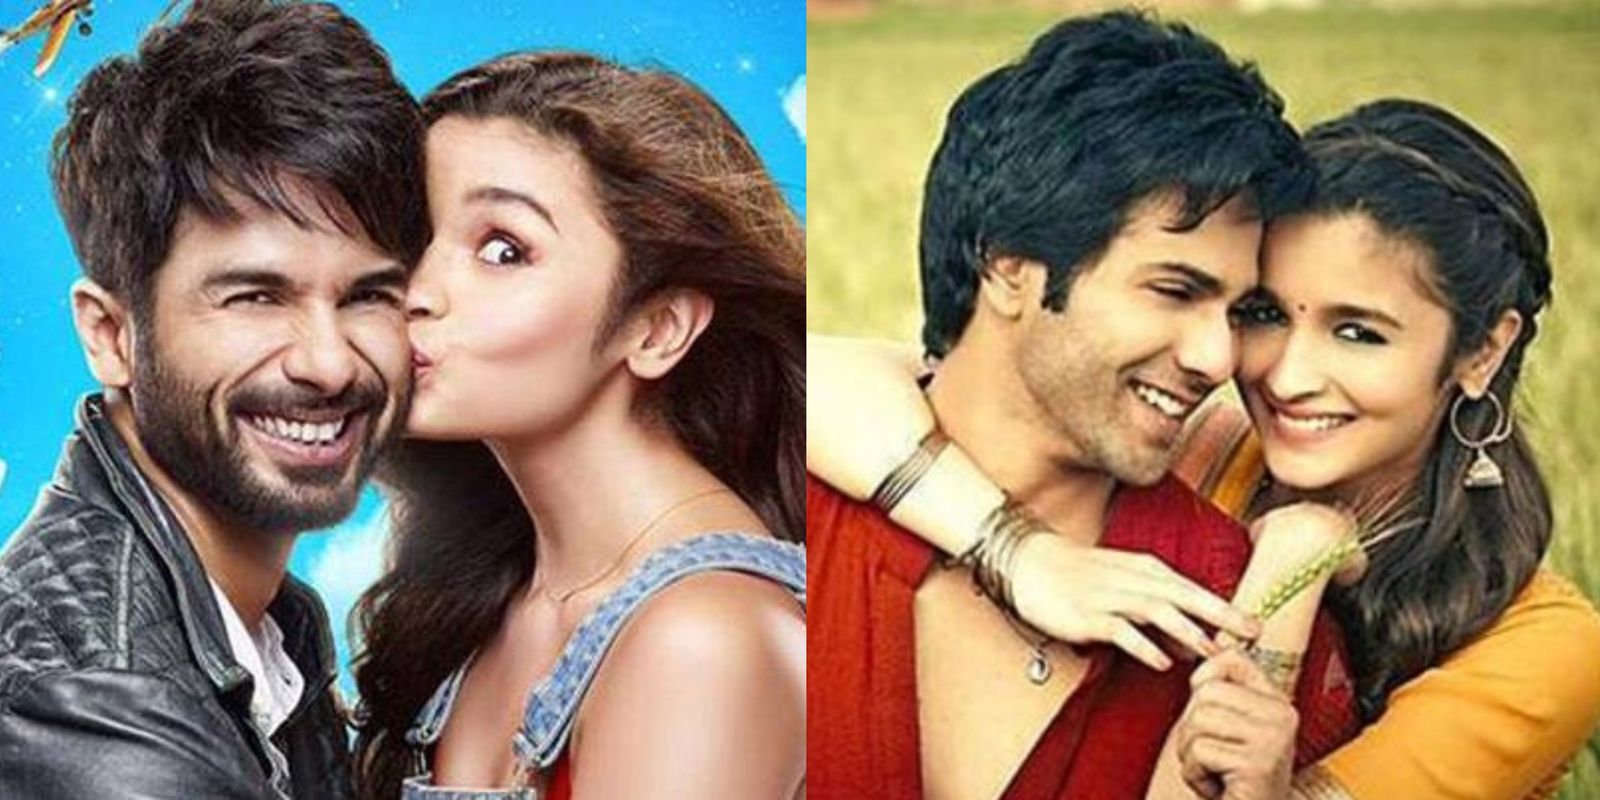 Alia Bhatt Opens Up About Shaandaar’s Failure; Thought Her Career Was Over After Watching Humpty Sharma Ki Dulhania